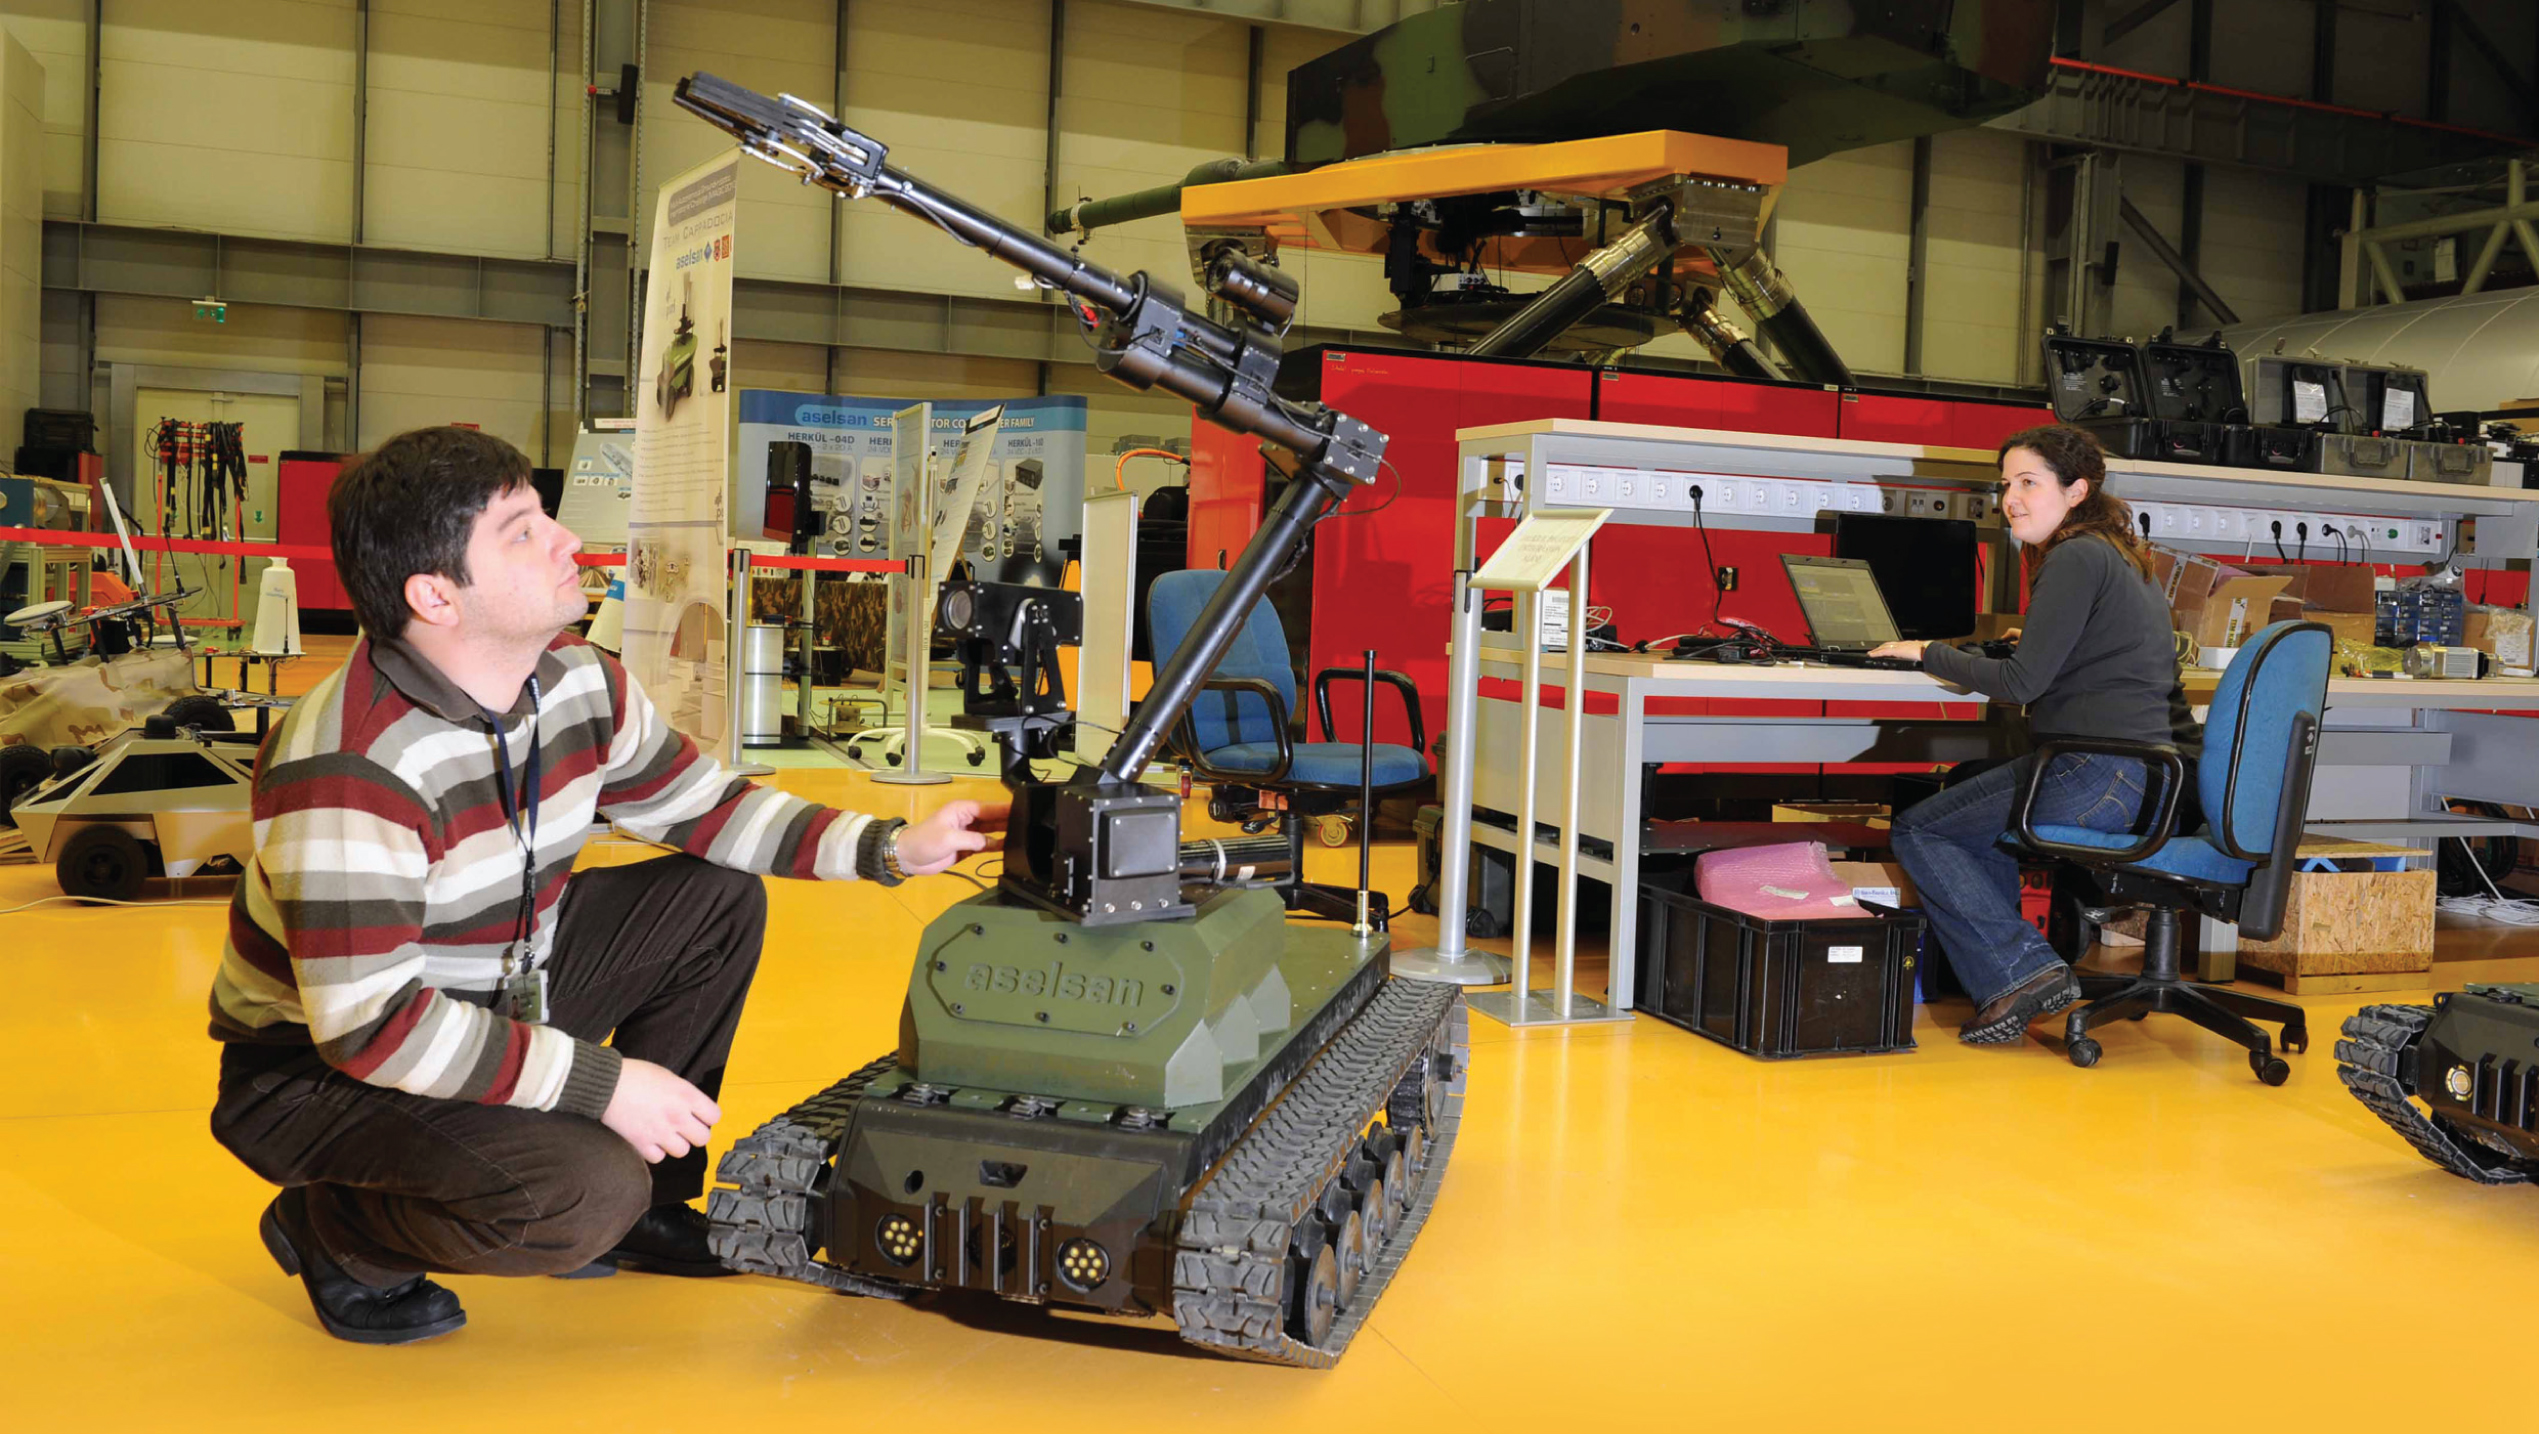 An Unmanned System Solution from Aselsan: “Bomb Disposal Robot”